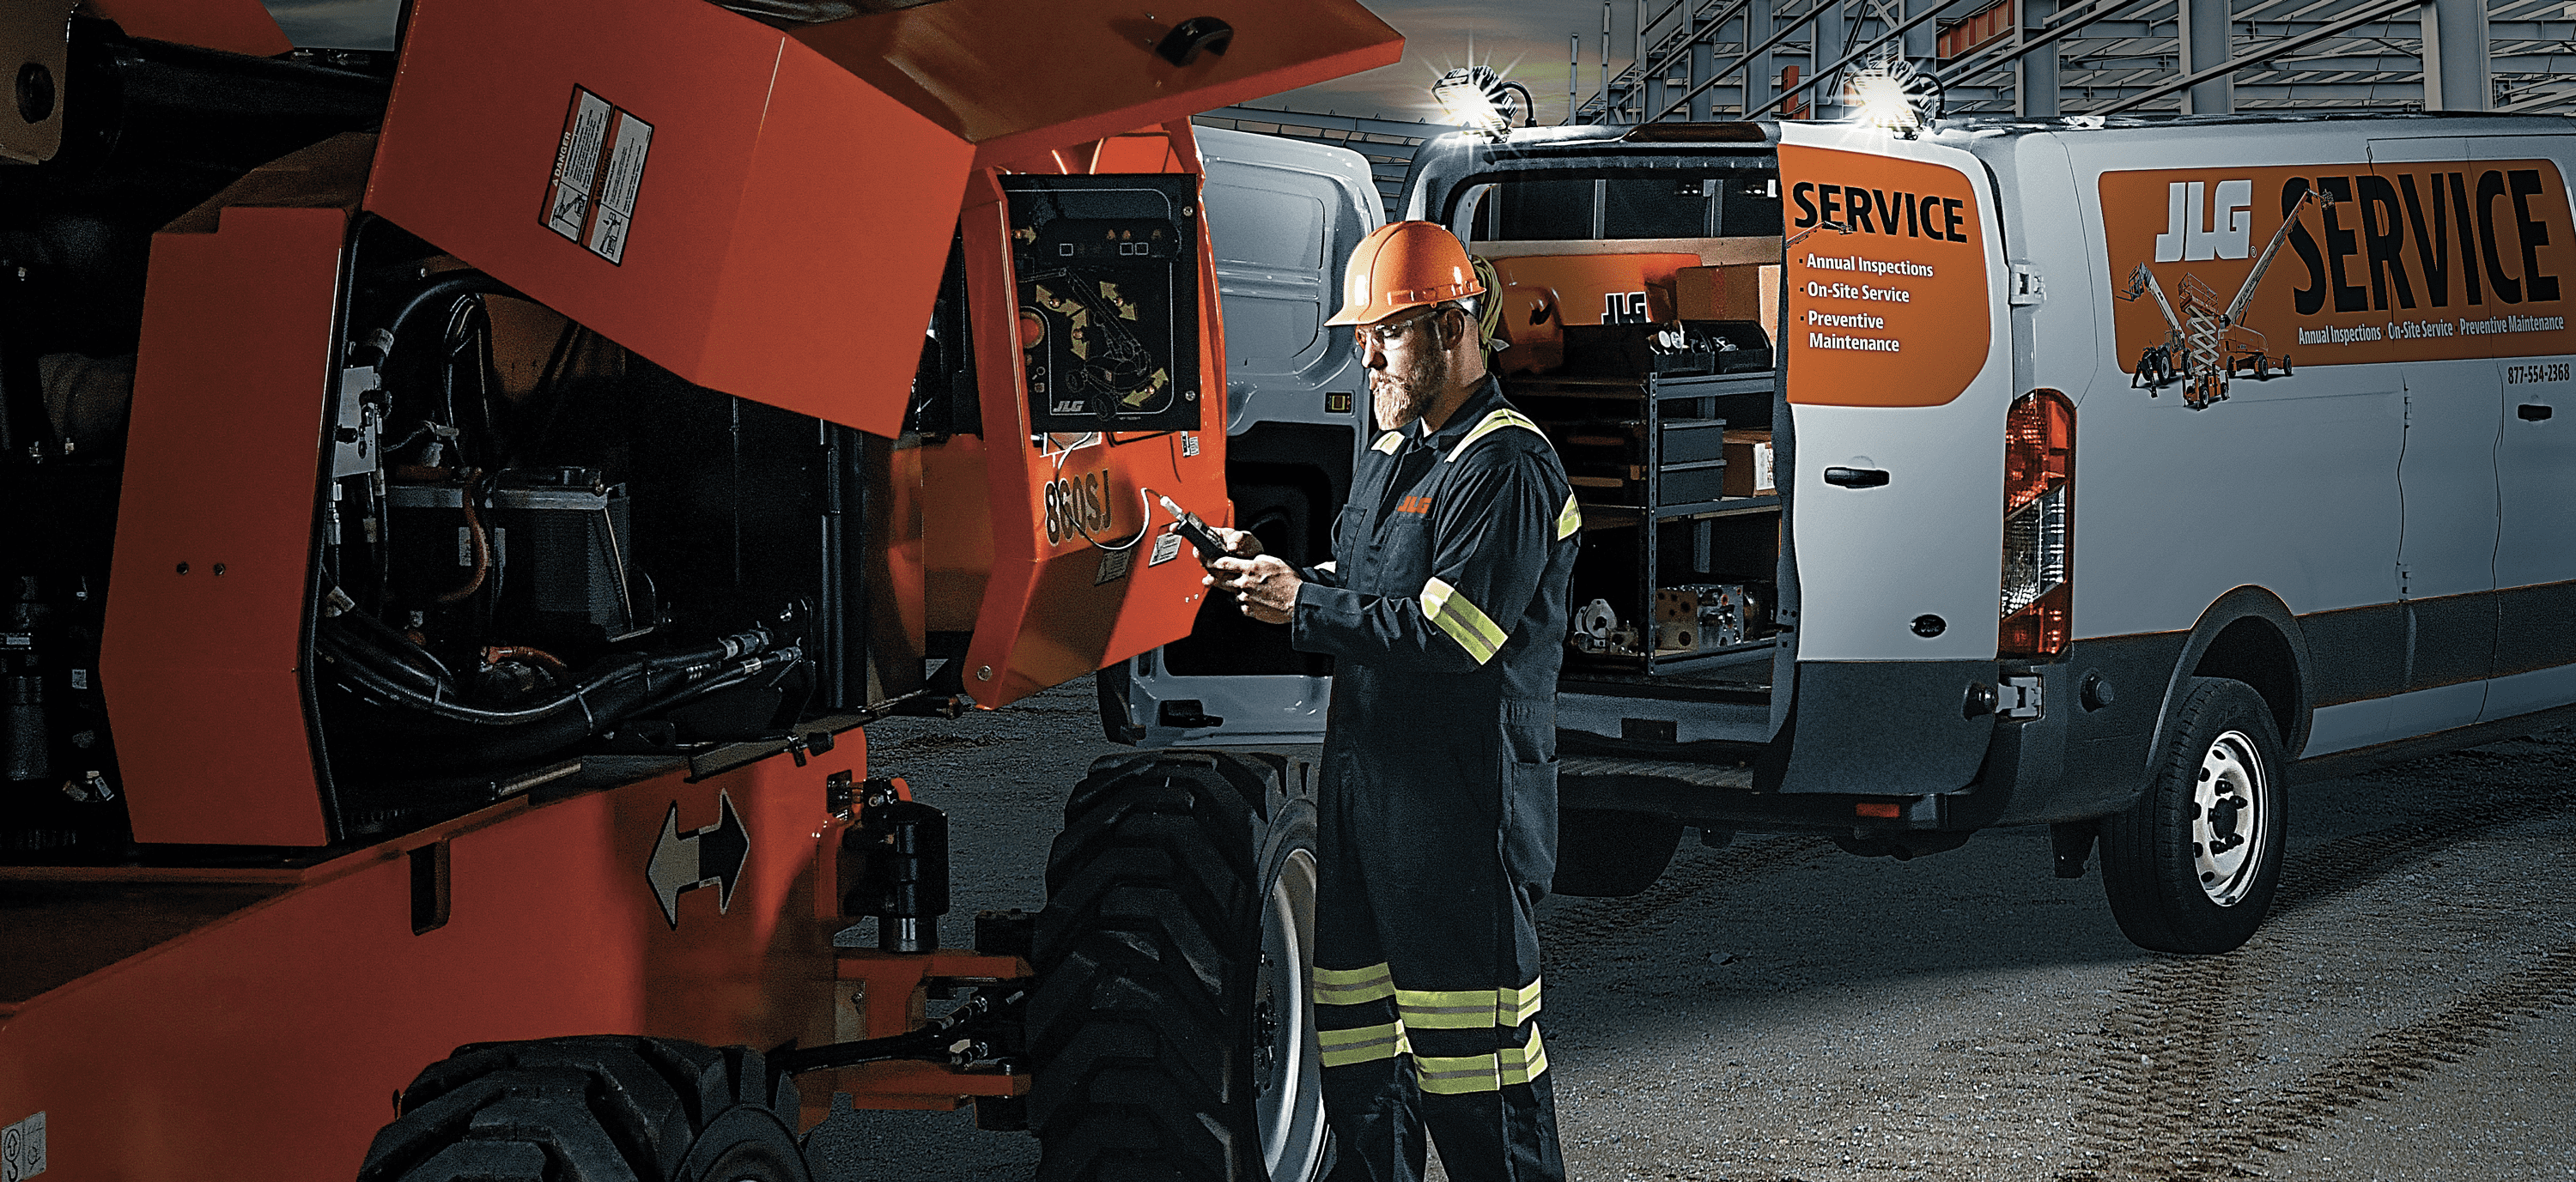 Male service technician repairing a JLG product outside at night